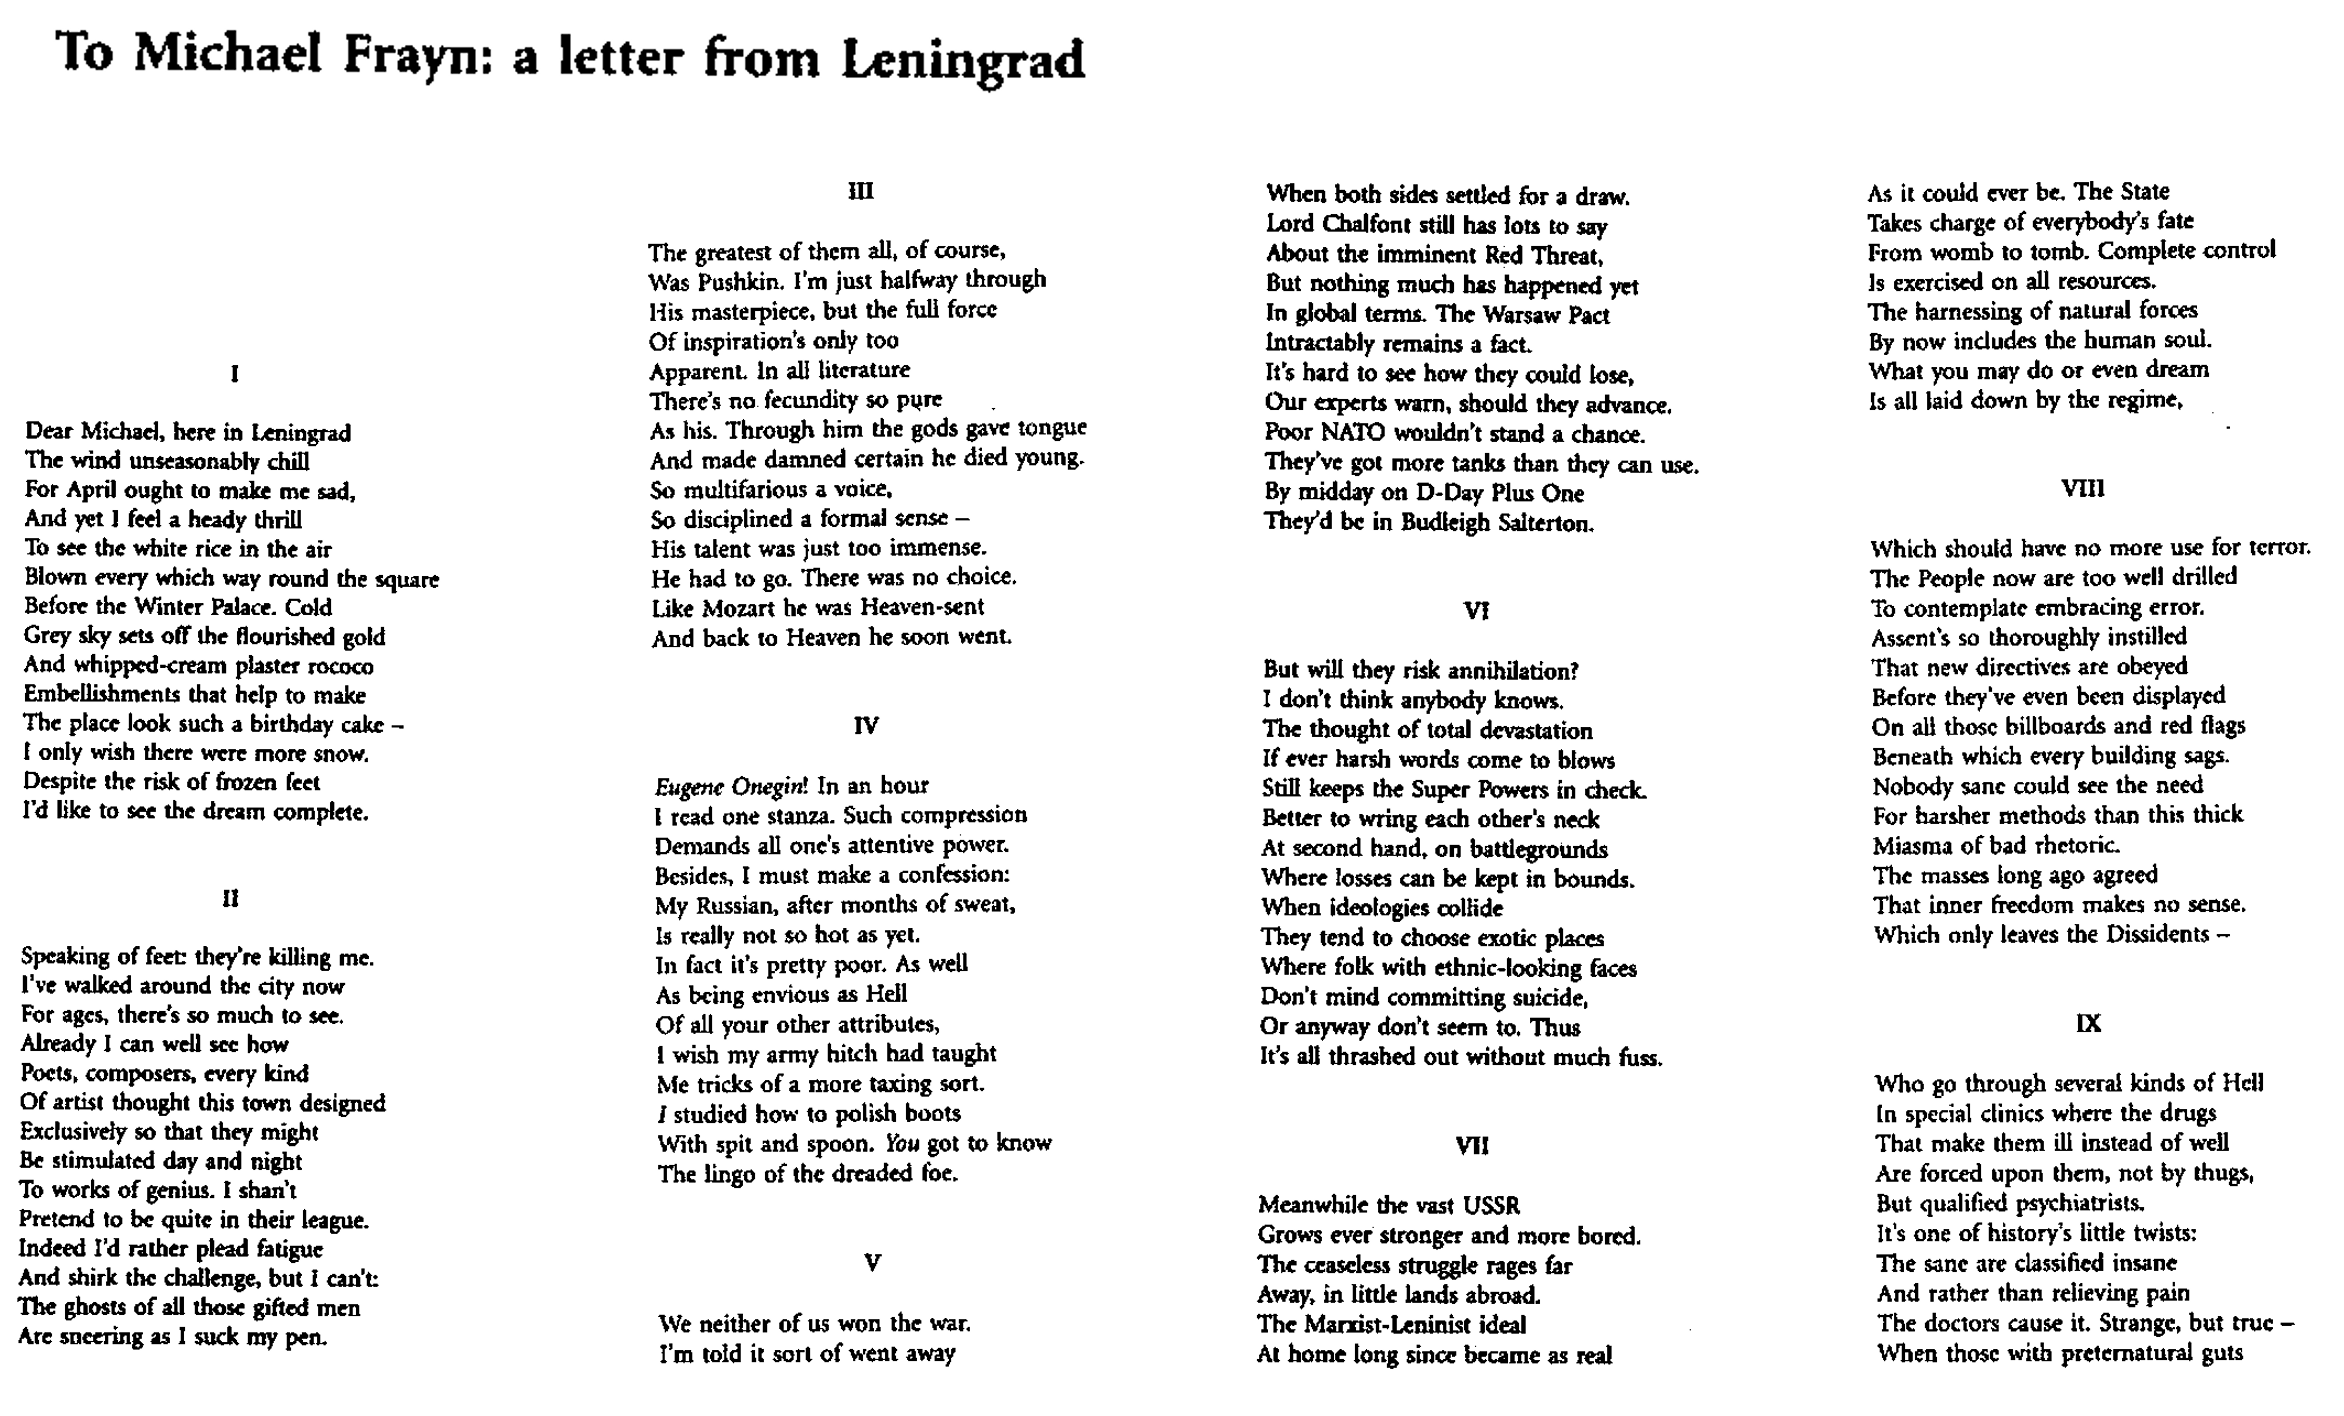 Clive James, "To Michael Frayn: A Letter from Leningrad" (1)